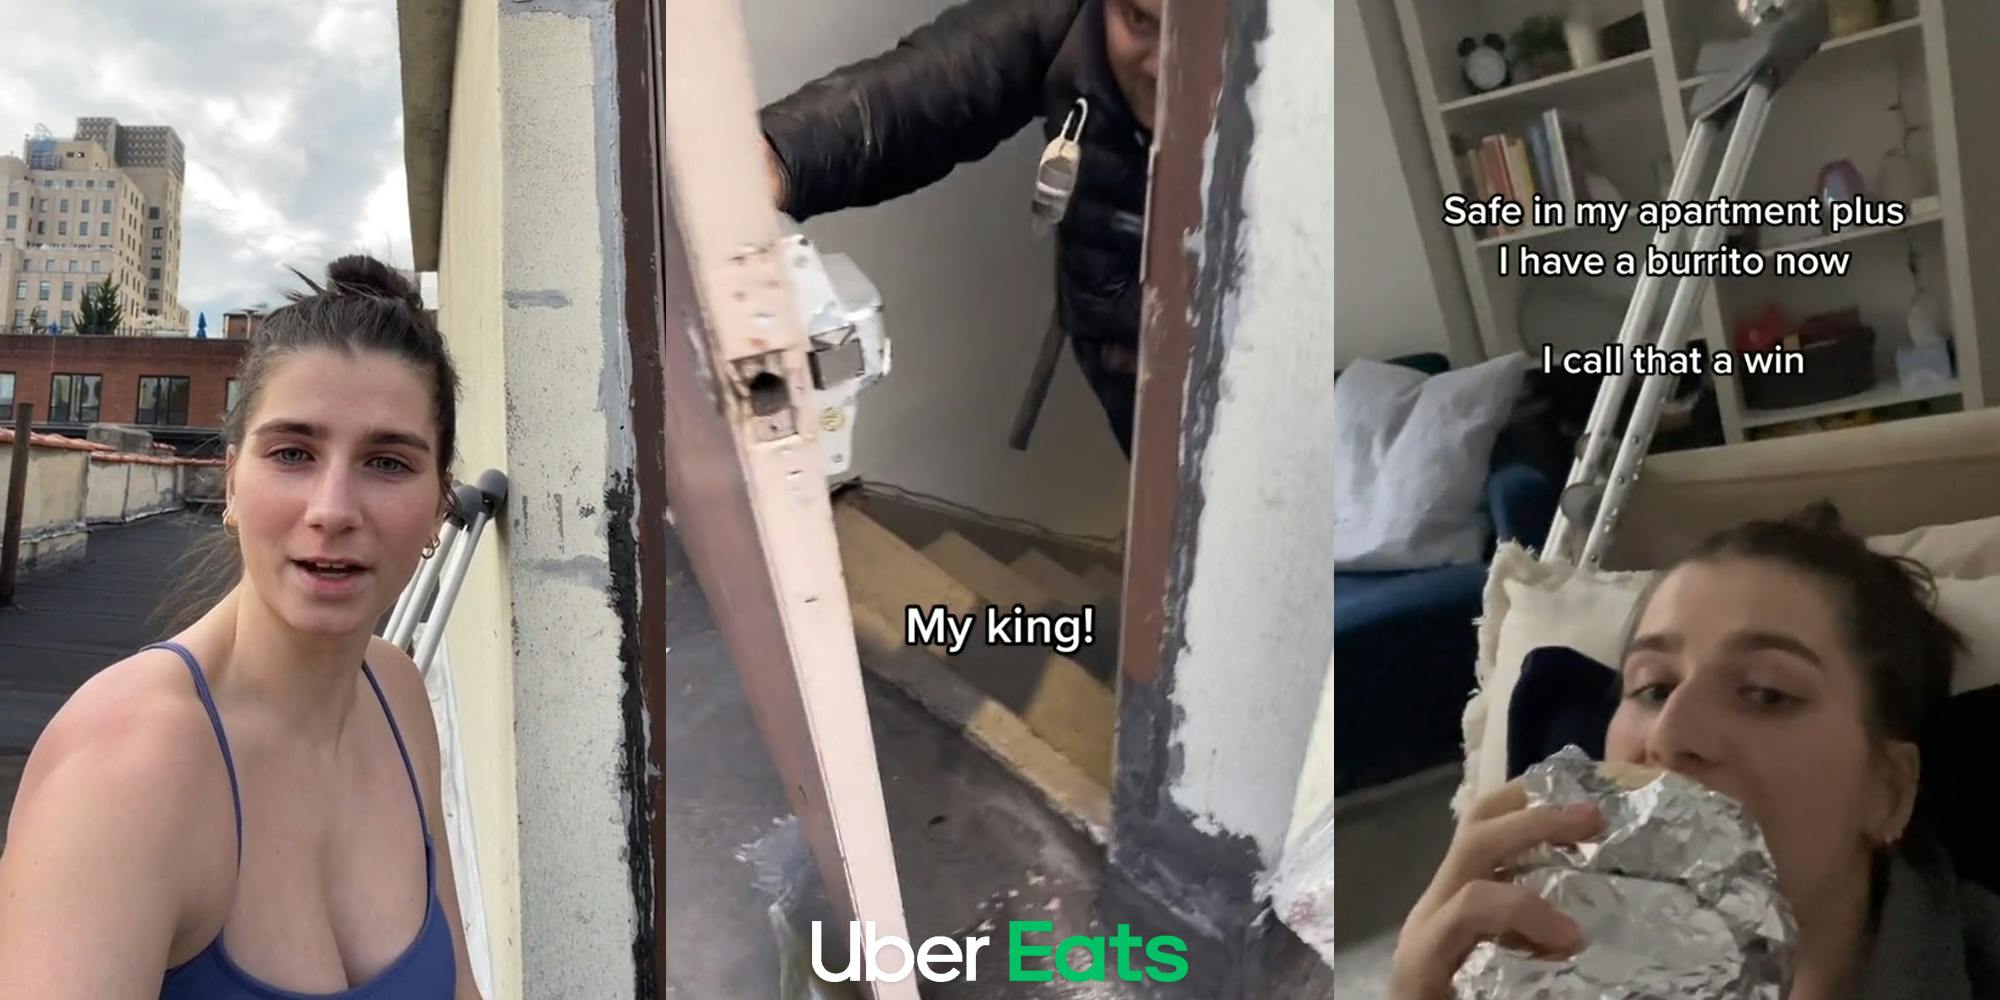 Uber Eats customer speaking on roof (l) Uber Eats employee opening roof door with Uber Eats logo at bottom with caption "My king!" (c) Uber Eats customer eating burrito with caption "Safe in my apartment plus I have a burrito I call that a win" (r)